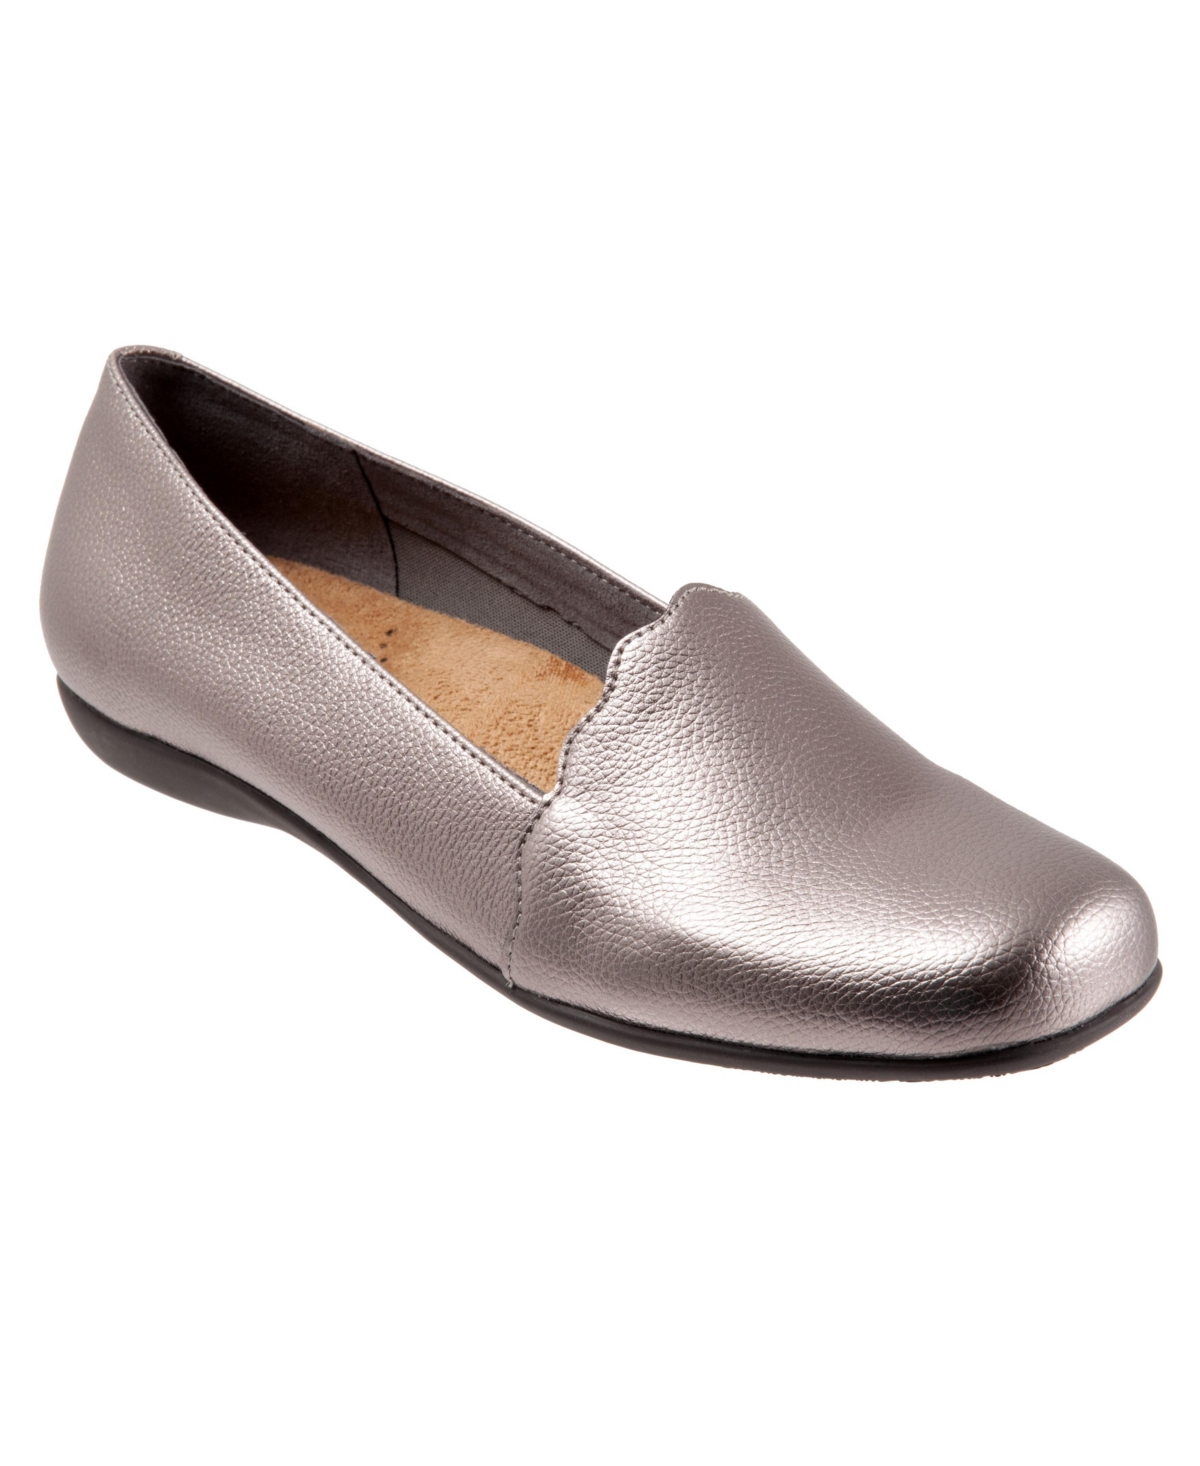 Women's Sage Loafers - Taupe patent